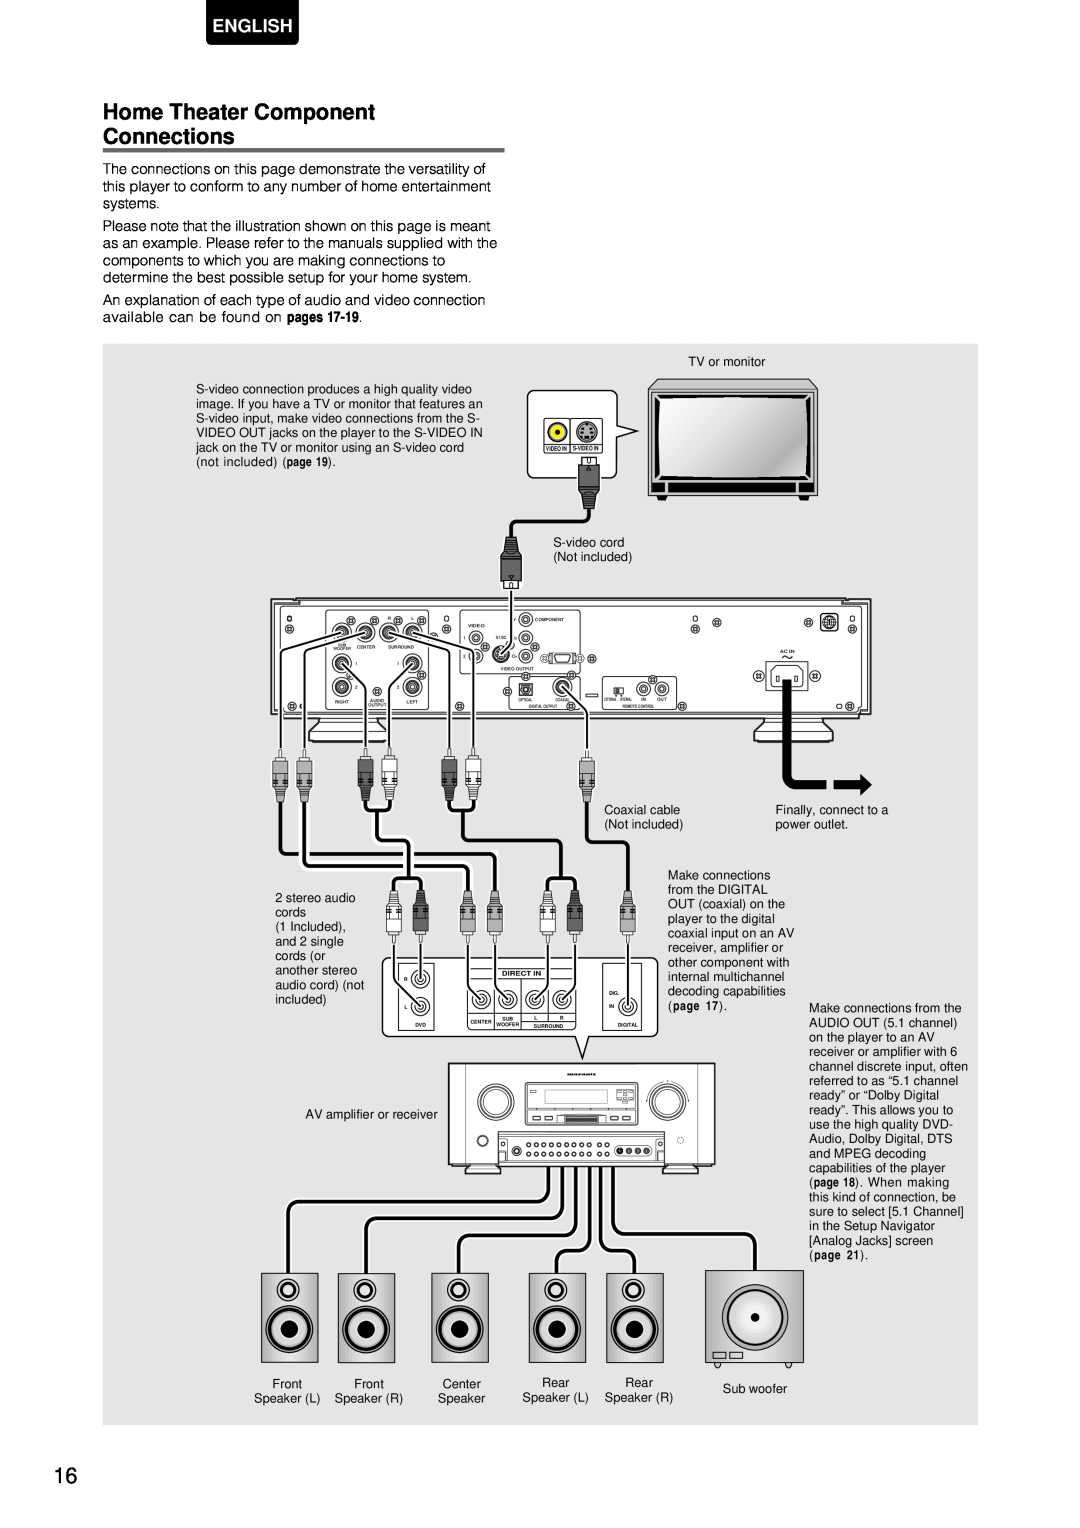 Marantz DV-12S1 manual Home Theater Component Connections, English, Finally, connect to a 